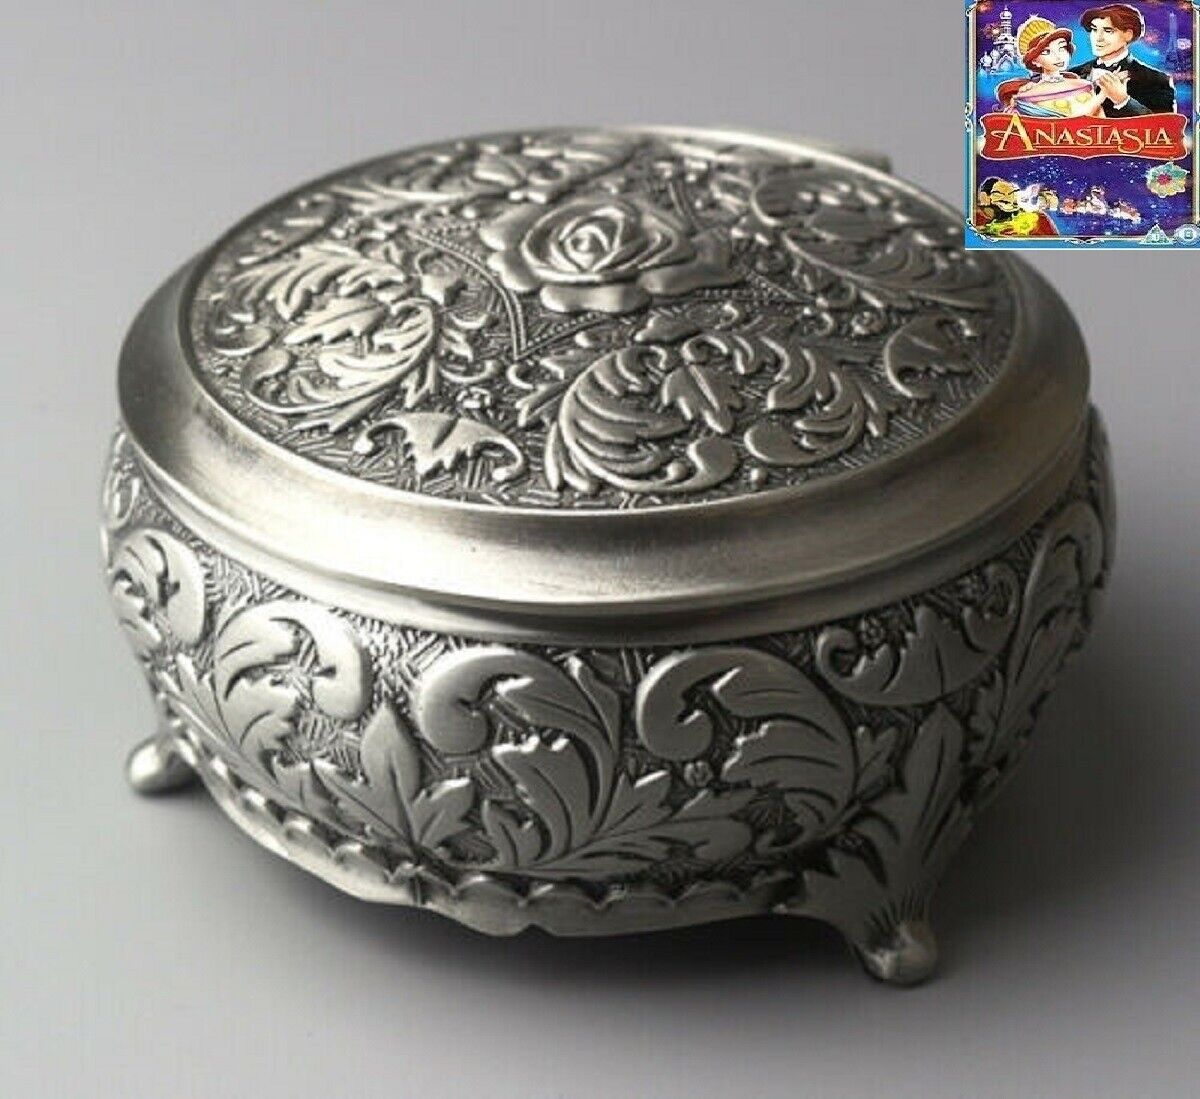 SANKYO TIN ALLOY CIRCLE SHAPE  MUSIC BOX :  ONCE UPON A DECEMBER ( HAVE VIDEO )